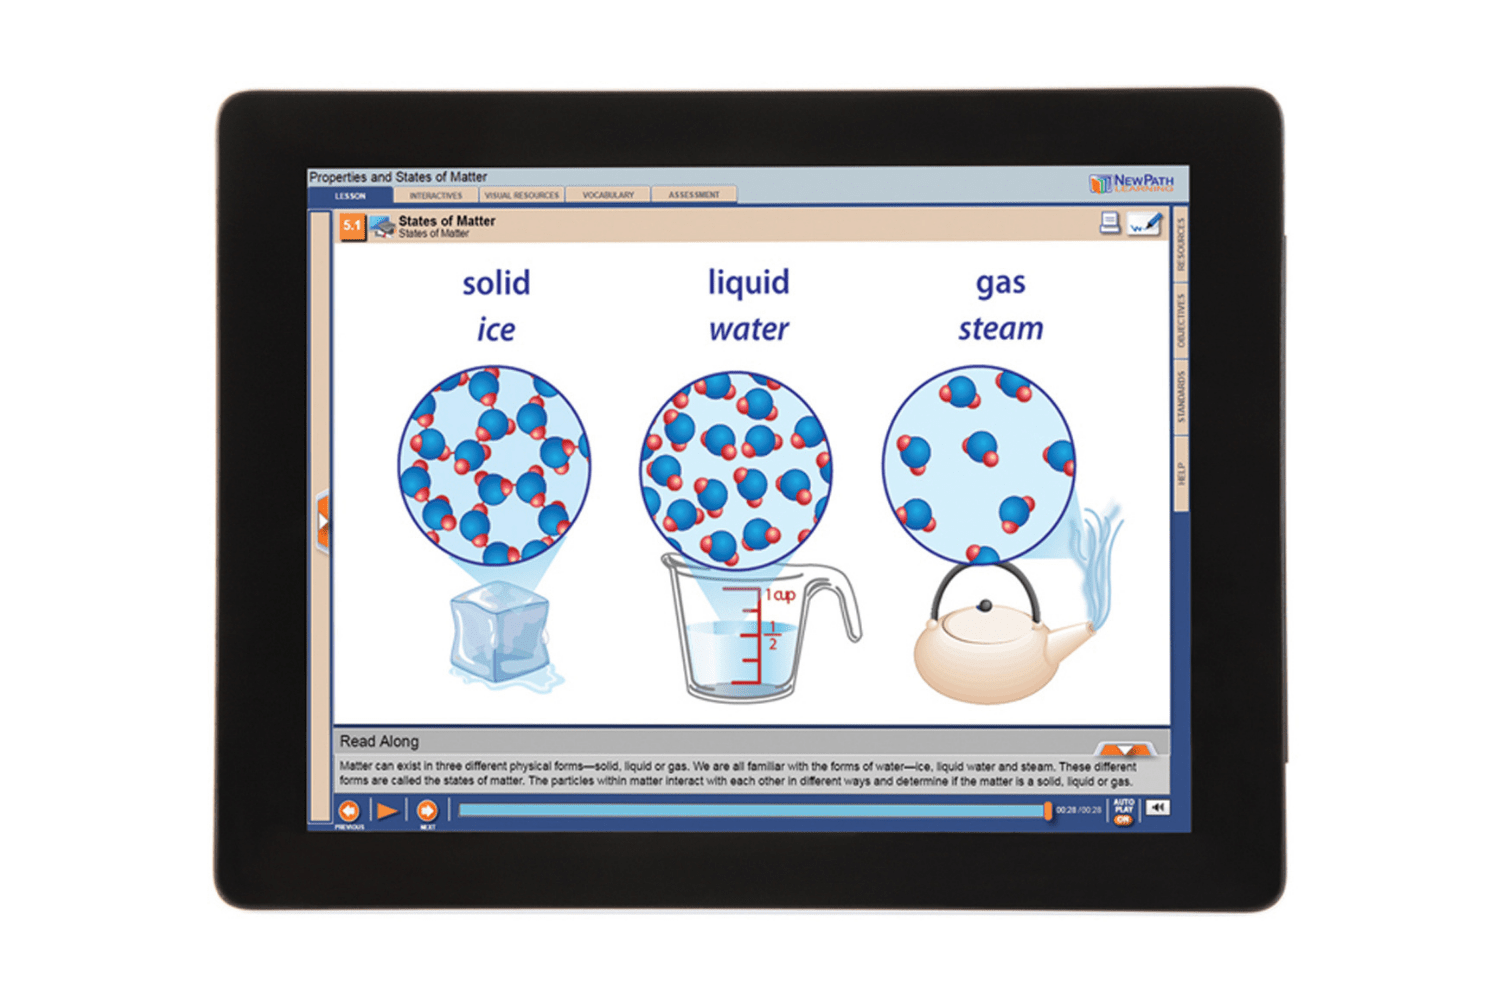 Arbor Scientific Properties & States of Matter Flip Chart Set With Online Multimedia Lesson